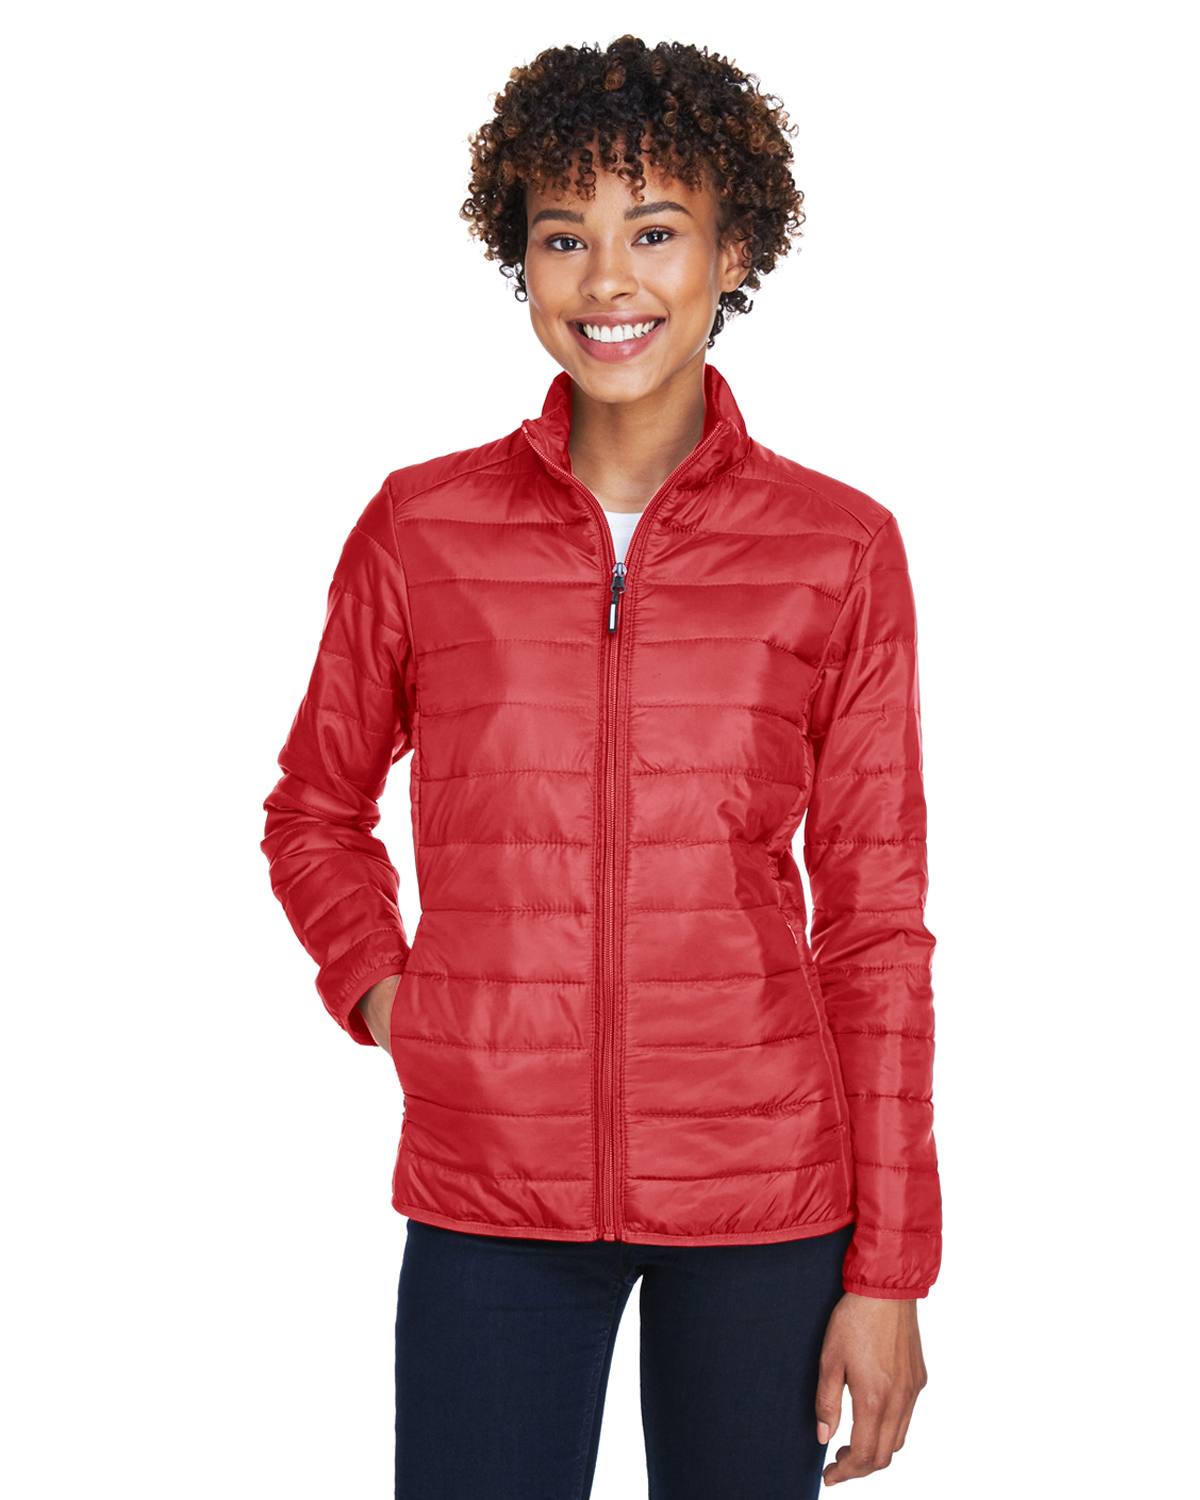 The Ash City - Core 365 Ladies' Prevail Packable Puffer Jacket - CLASSIC RED 850 - XS - image 1 of 1